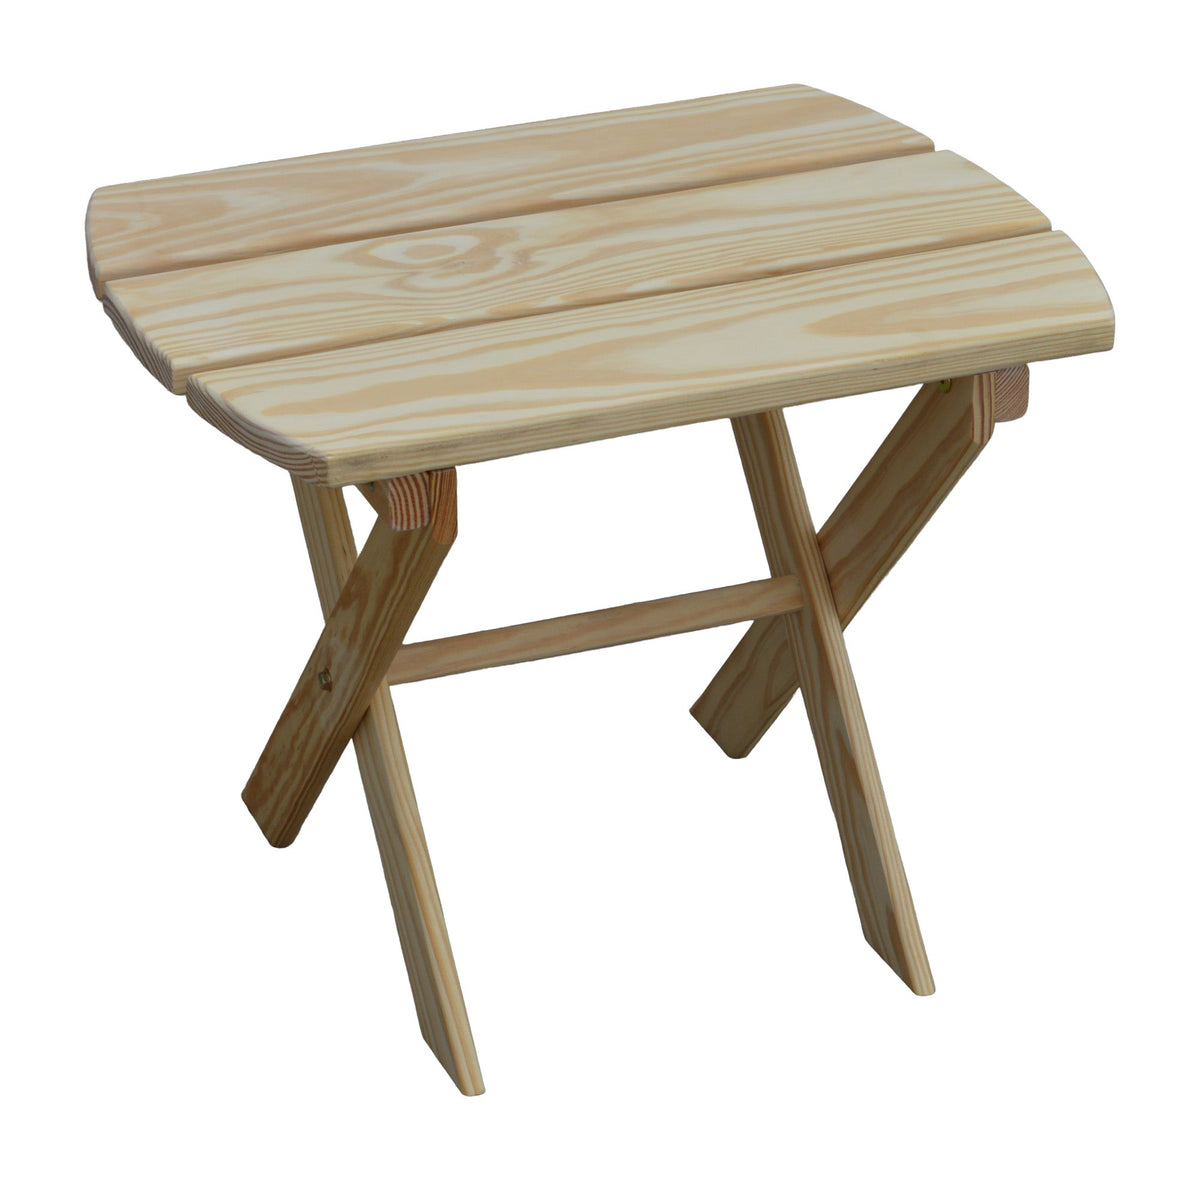 Solid Knotfree Yellow Pine Folding Oval End Table Outdoor Table